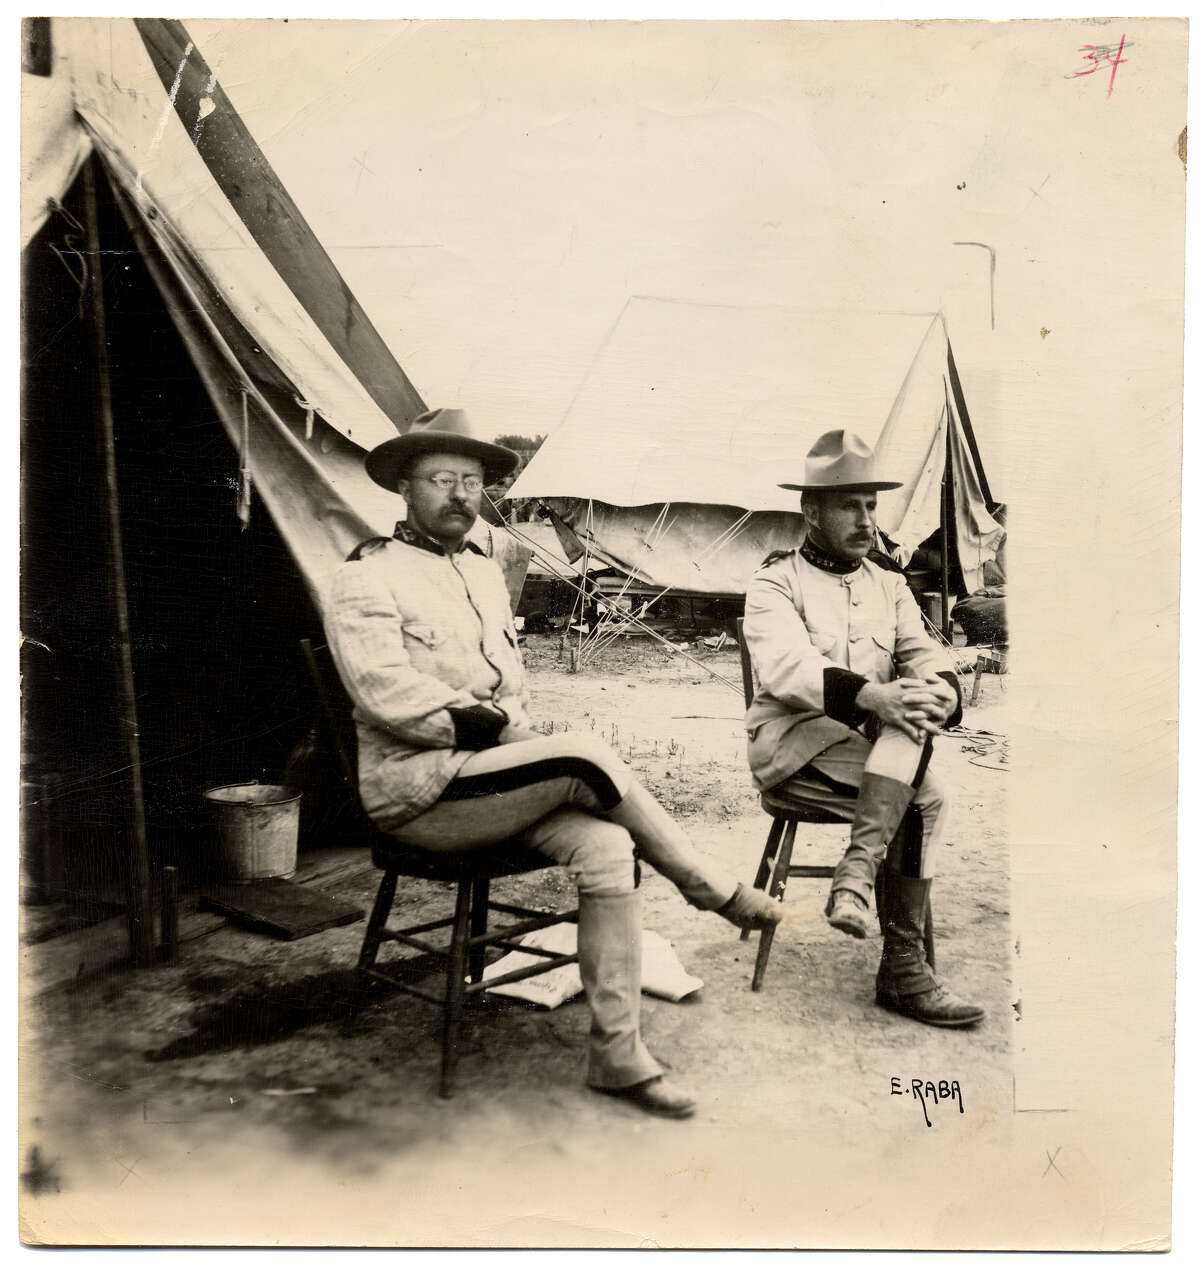 Theodore Roosevelt - Before becoming Vice President and eventually President, Roosevelt came to San Antonio in 1898 to train with the U.S. 1st Volunteer Cavalry, the “Rough Riders” who won fame during the battle on San Juan Hill in the Spanish American War. Ernst Raba of San Antonio took this photo of Lt. Col. Theodore Roosevelt (left) and Col. Leonard Wood three months before the charge up San Juan Hill in Cuba.